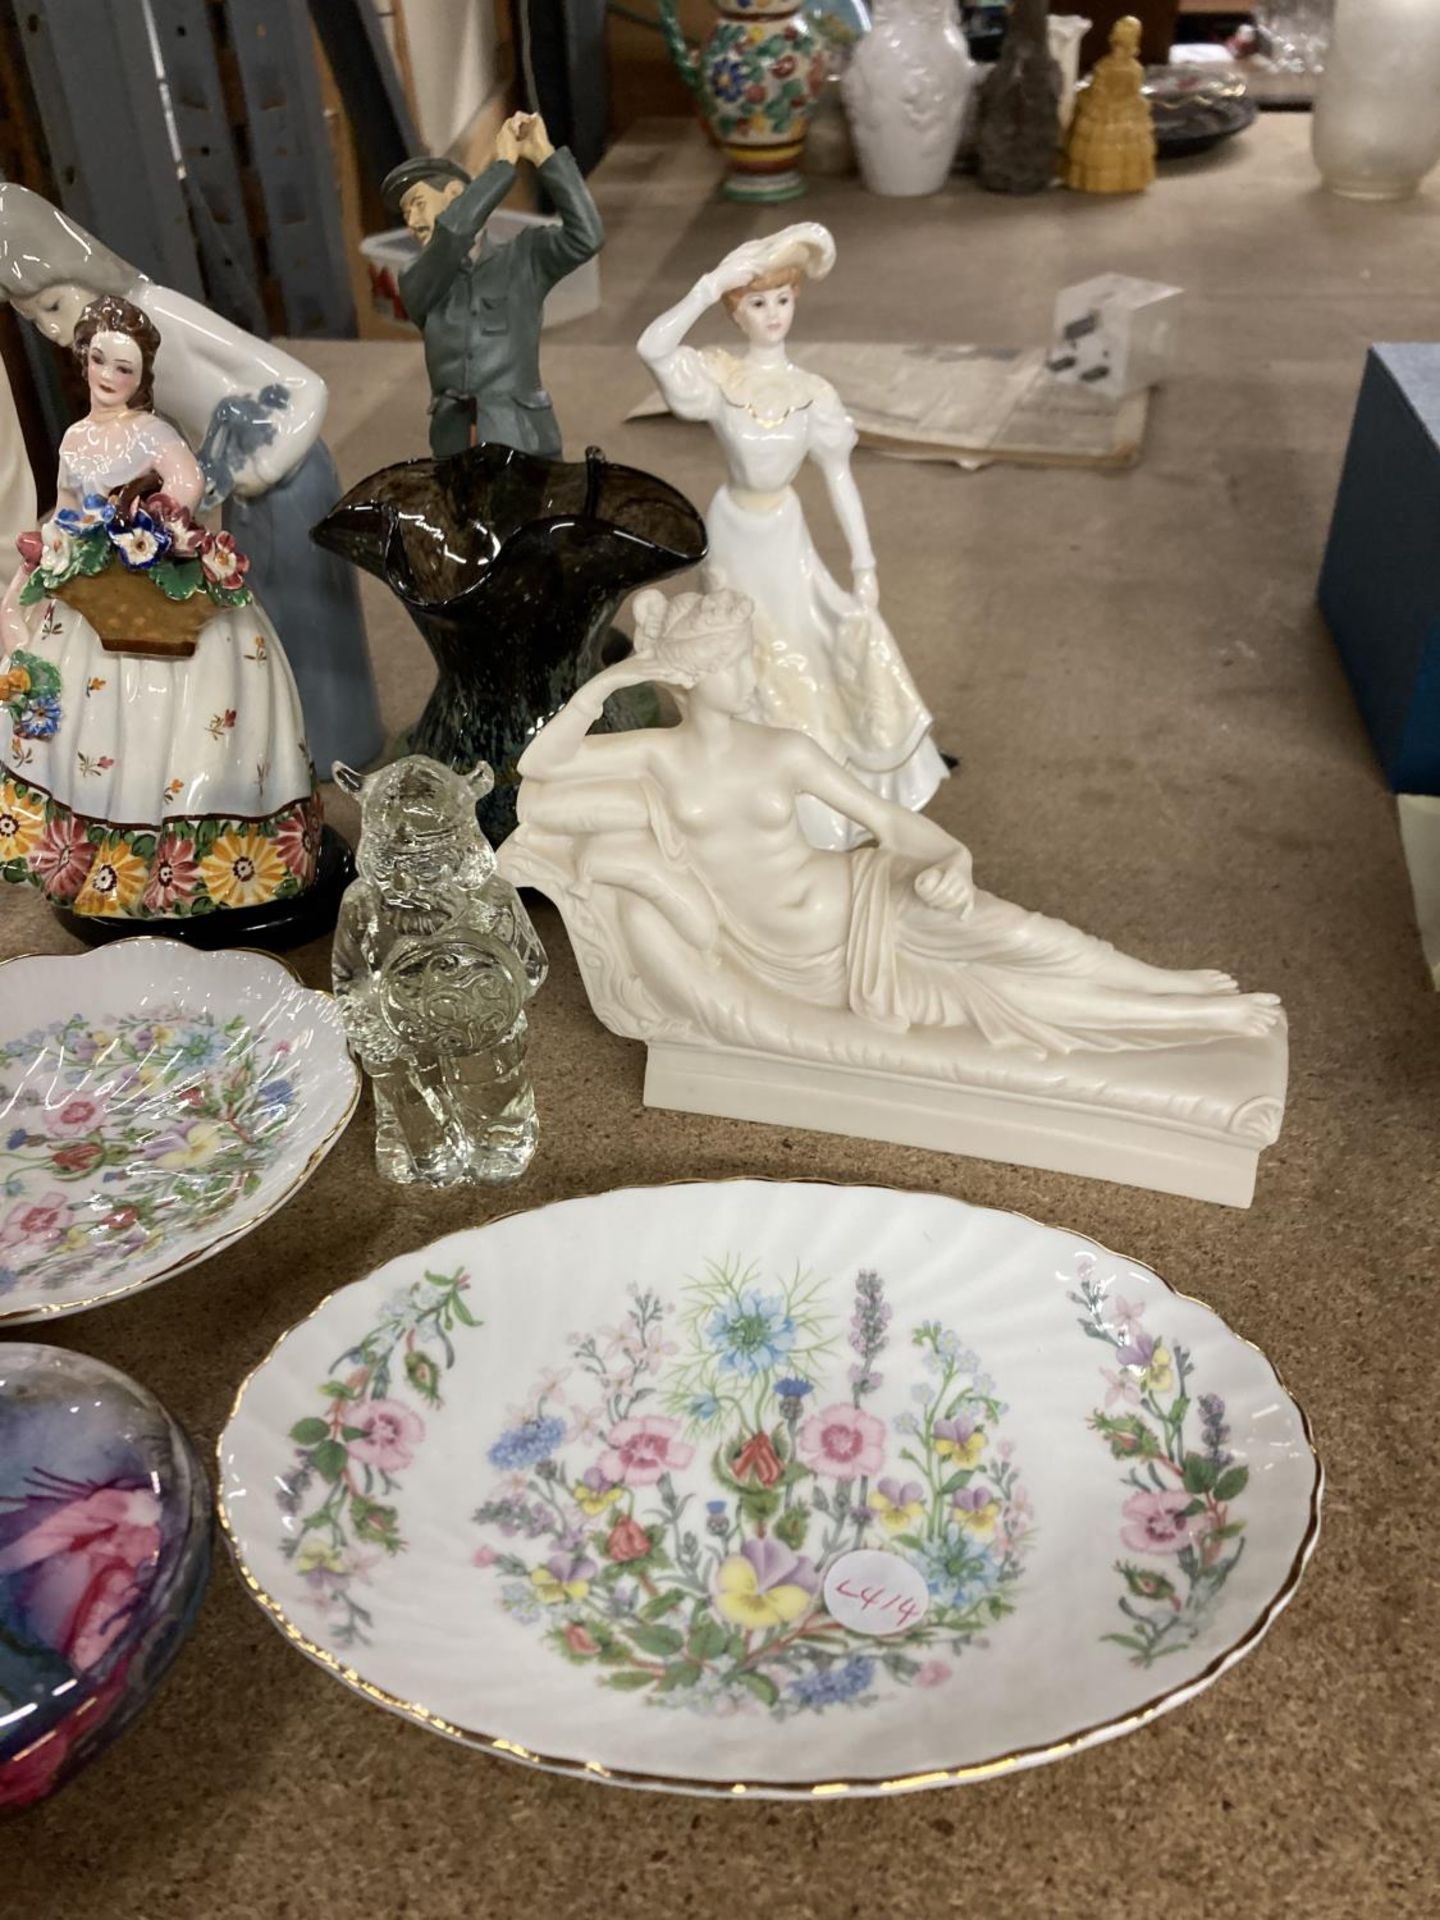 SIX FIGURINES TO INCLUDE COALPORT, AYNSLEY PLATES AND A PIN TRAY, SCENT BOTTLE, VASE, ETC - Image 2 of 4